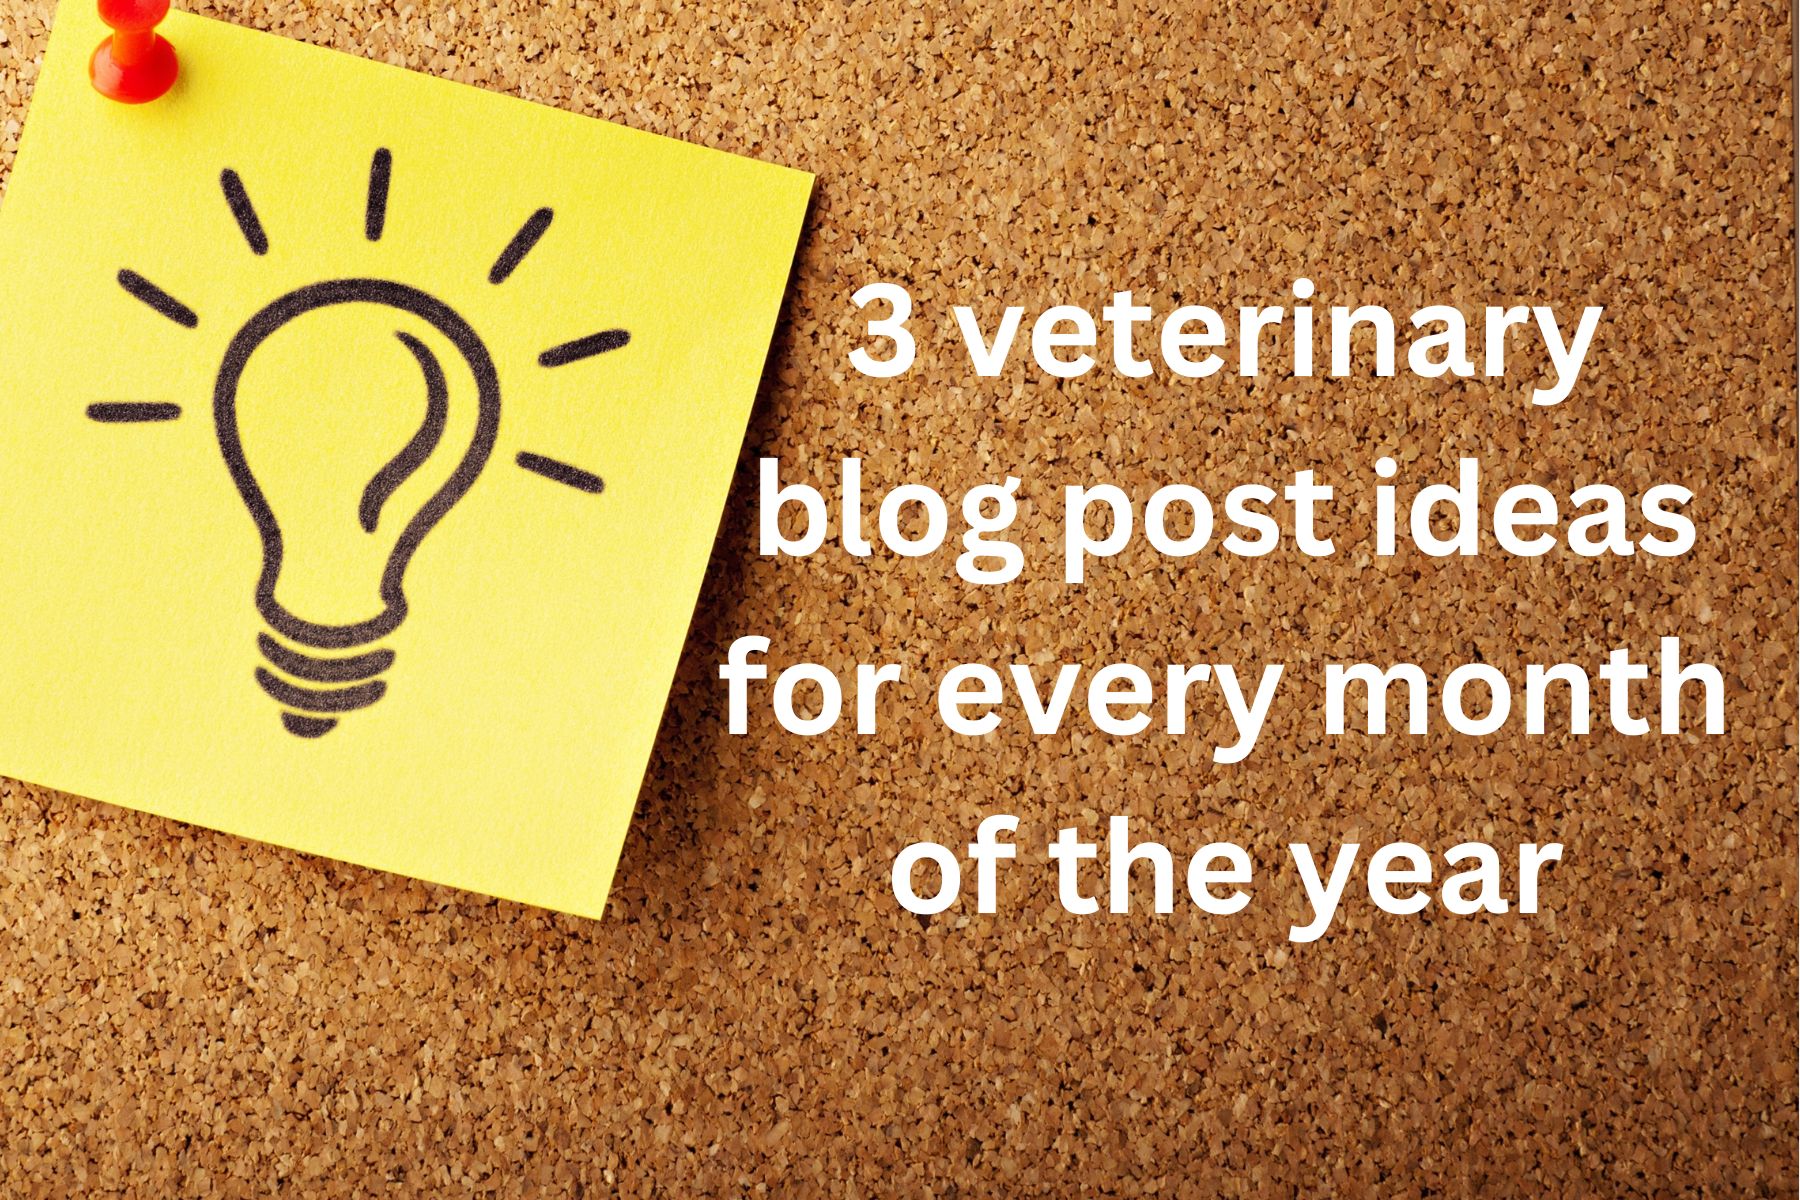 3 veterinary blog post ideas for every month of the year